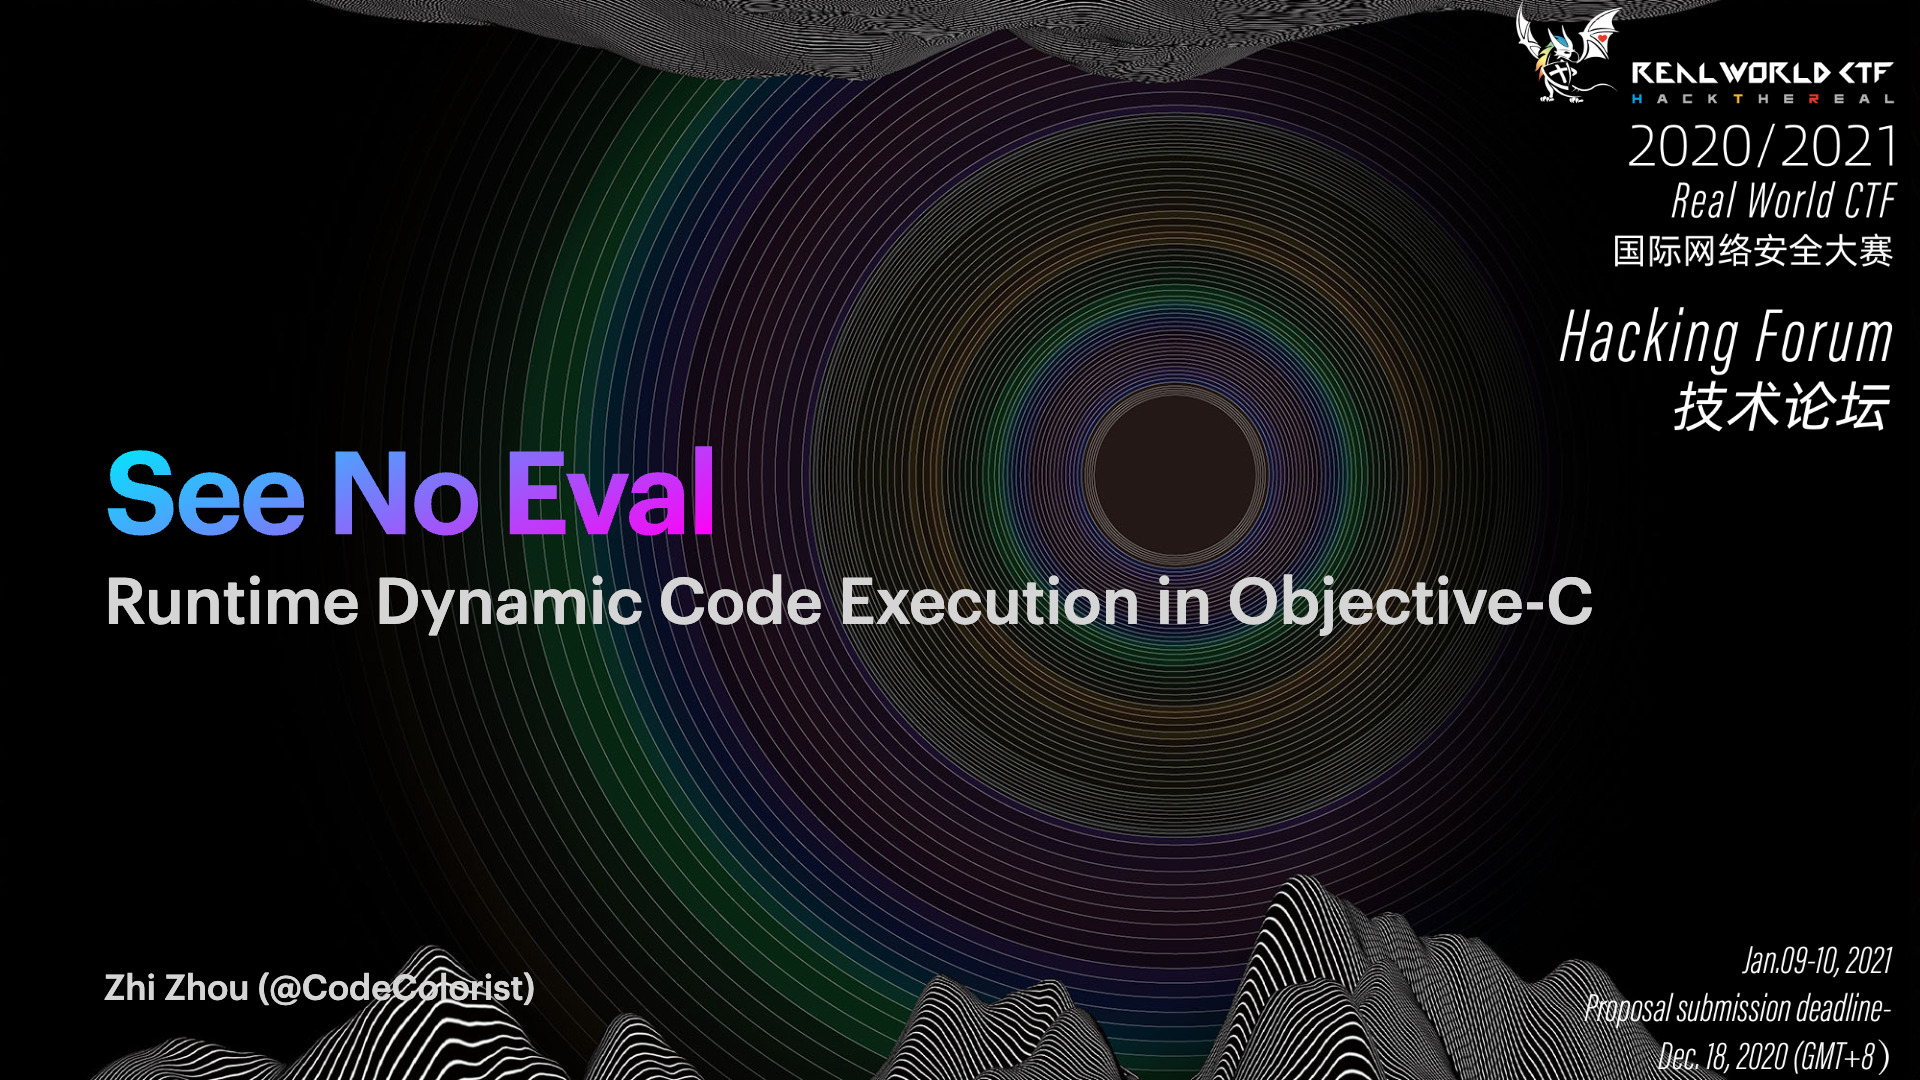 See No Eval: Runtime Dynamic Code Execution in Objective-C (RWCTF 2021)